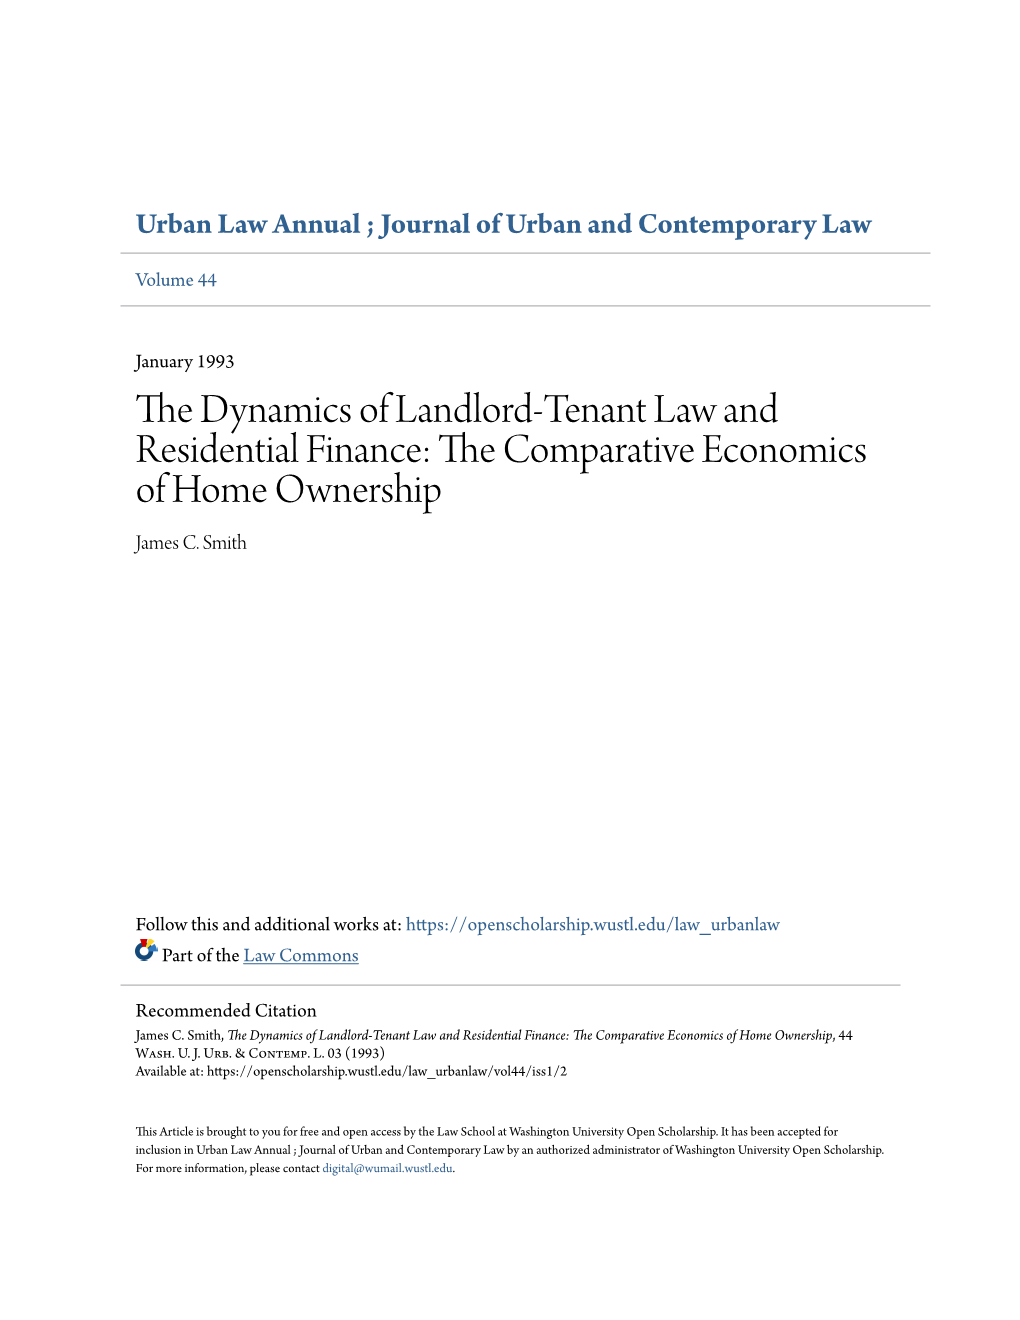 The Dynamics of Landlord-Tenant Law and Residential Finance: the Ompc Arative Economics of Home Ownership James C